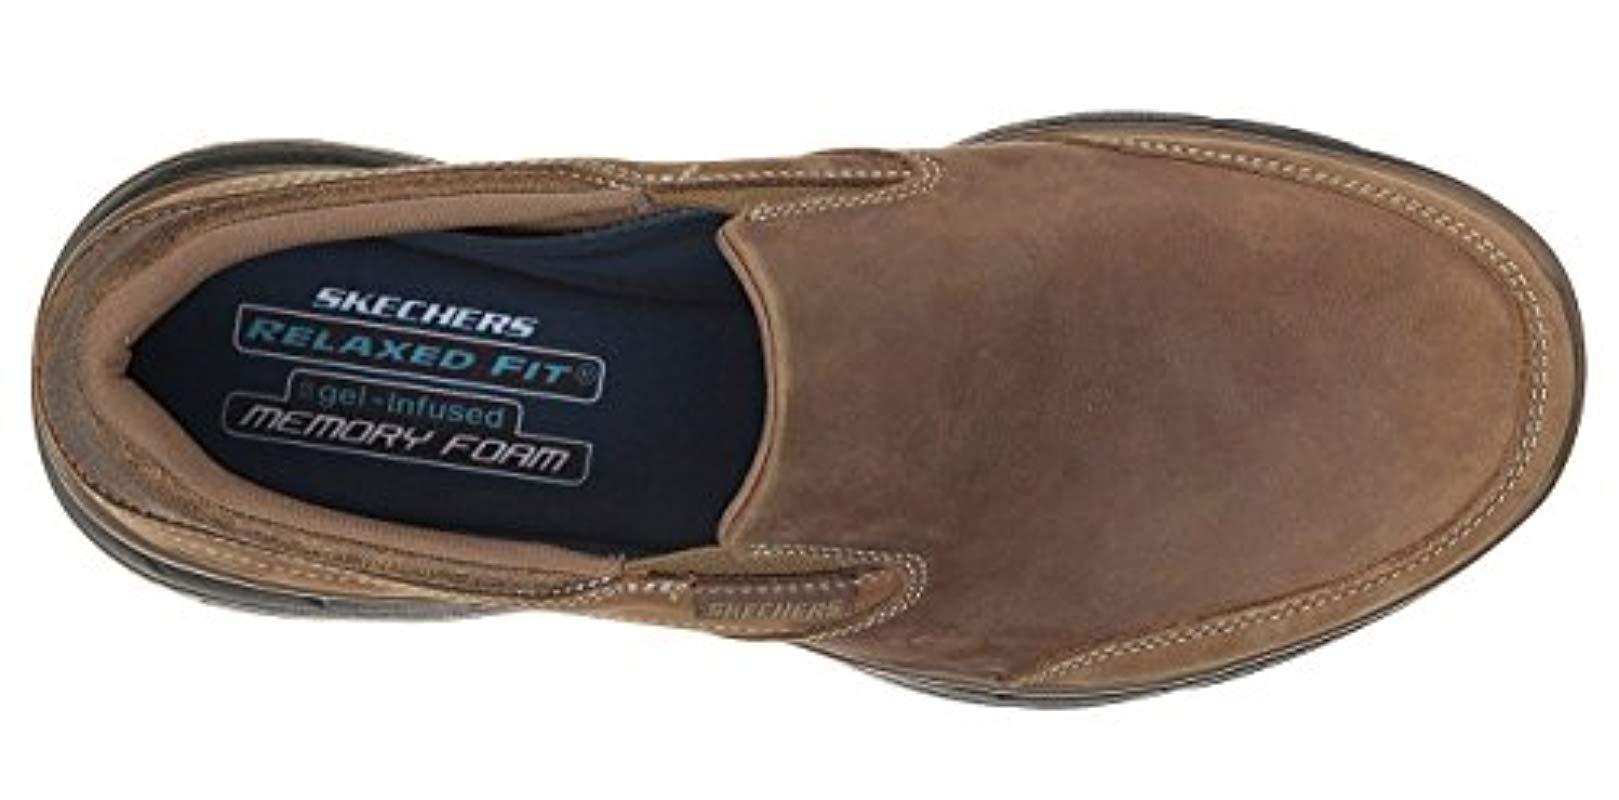 skechers men's relaxed fit glides calculous slip on